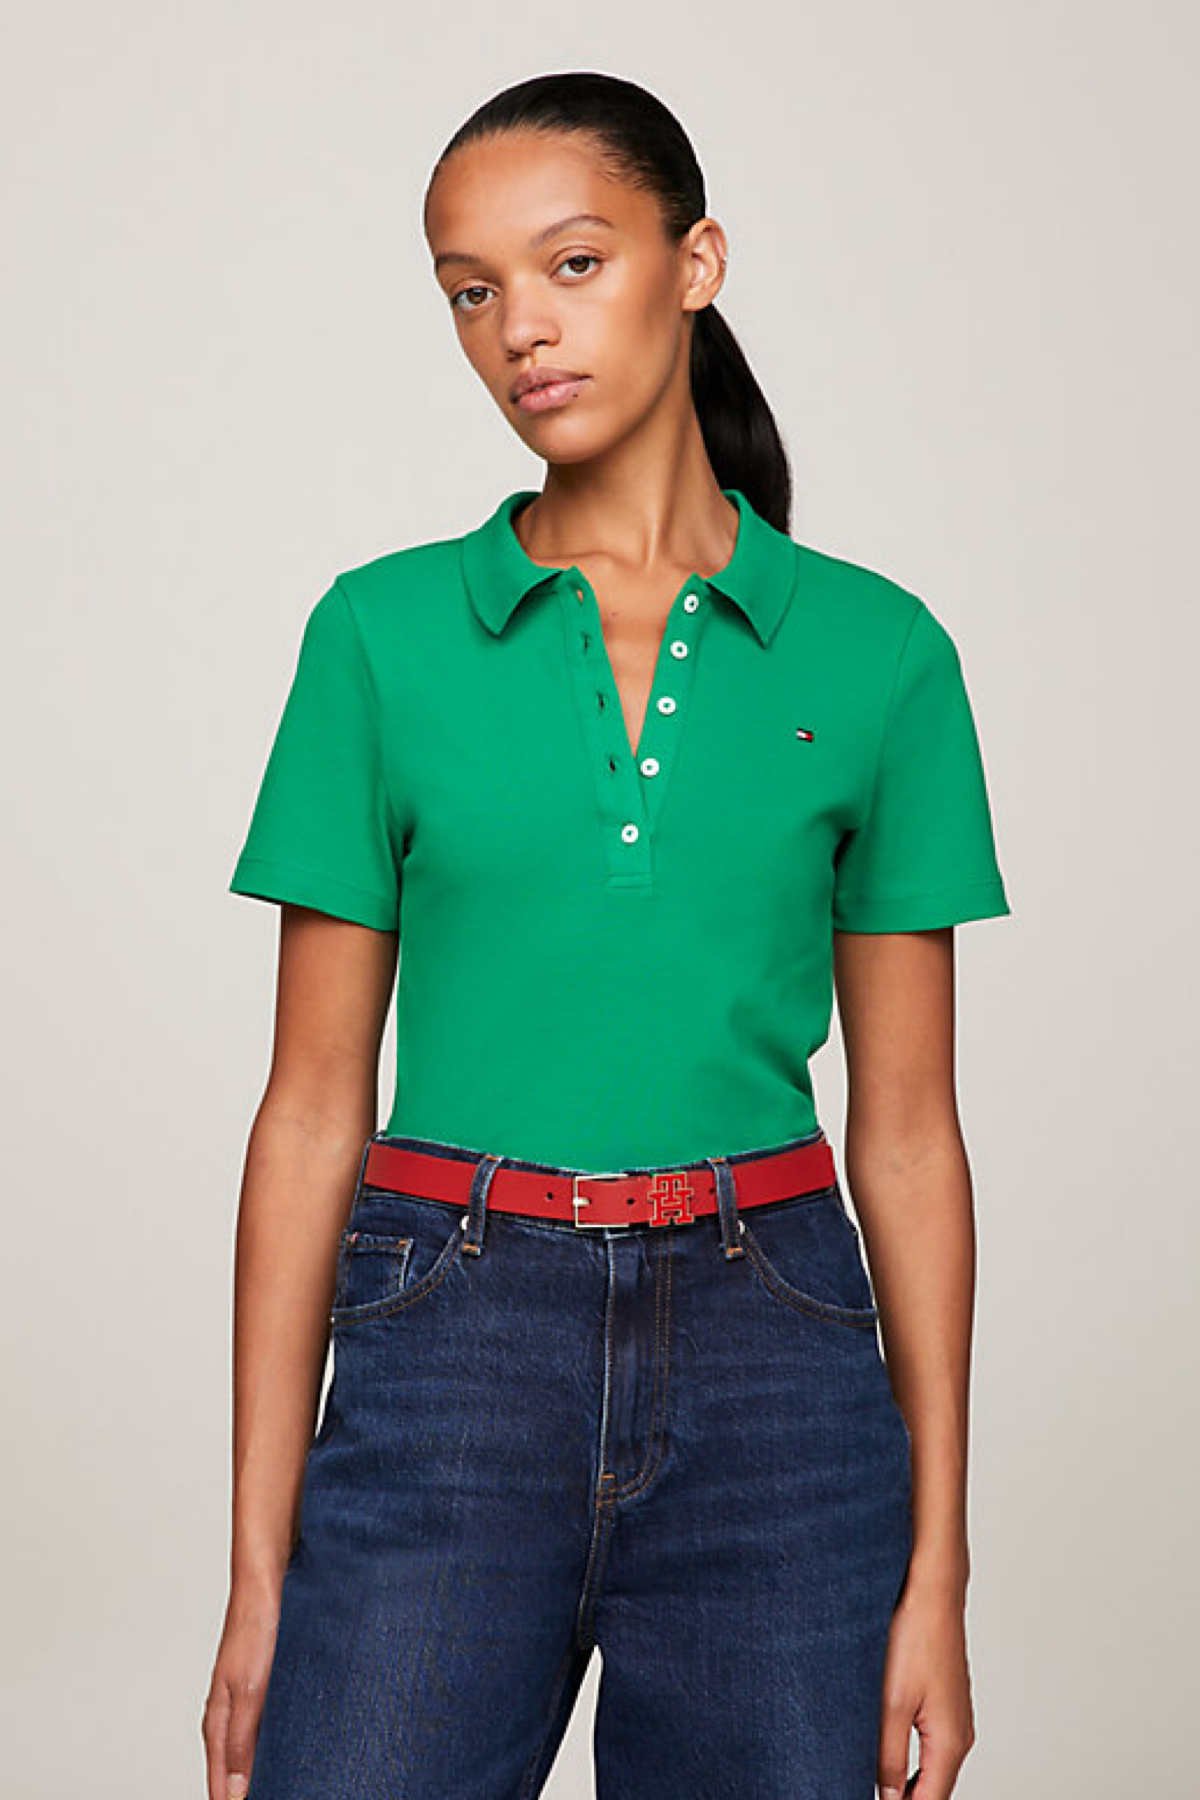 Tommy Hilfiger polo 1985 collection slim fit green